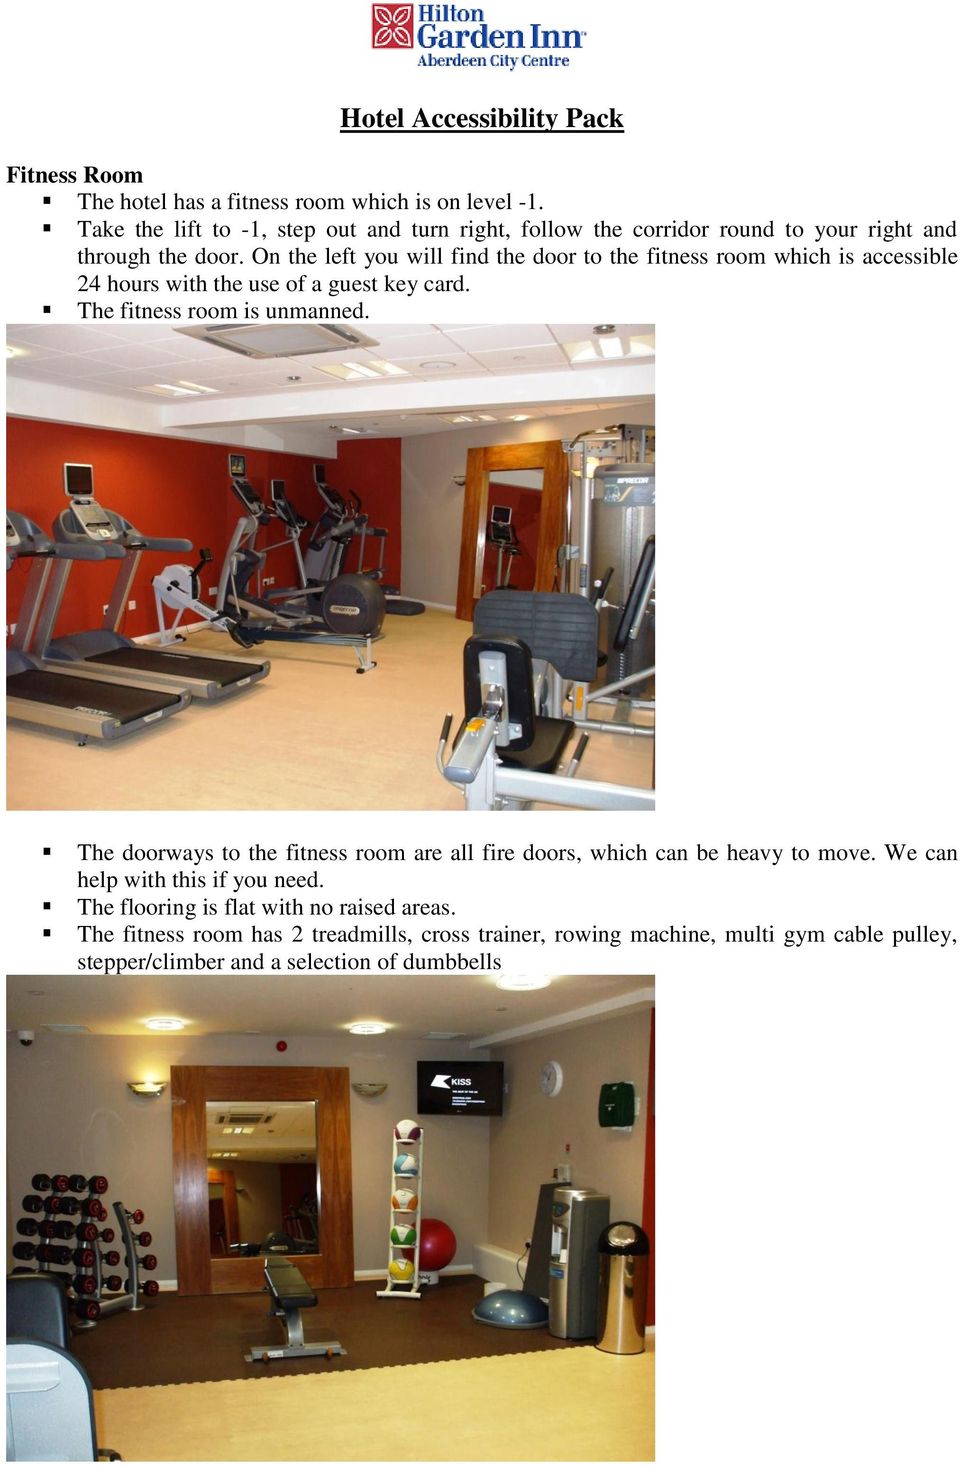 On the left you will find the door to the fitness room which is accessible 24 hours with the use of a guest key card. The fitness room is unmanned.